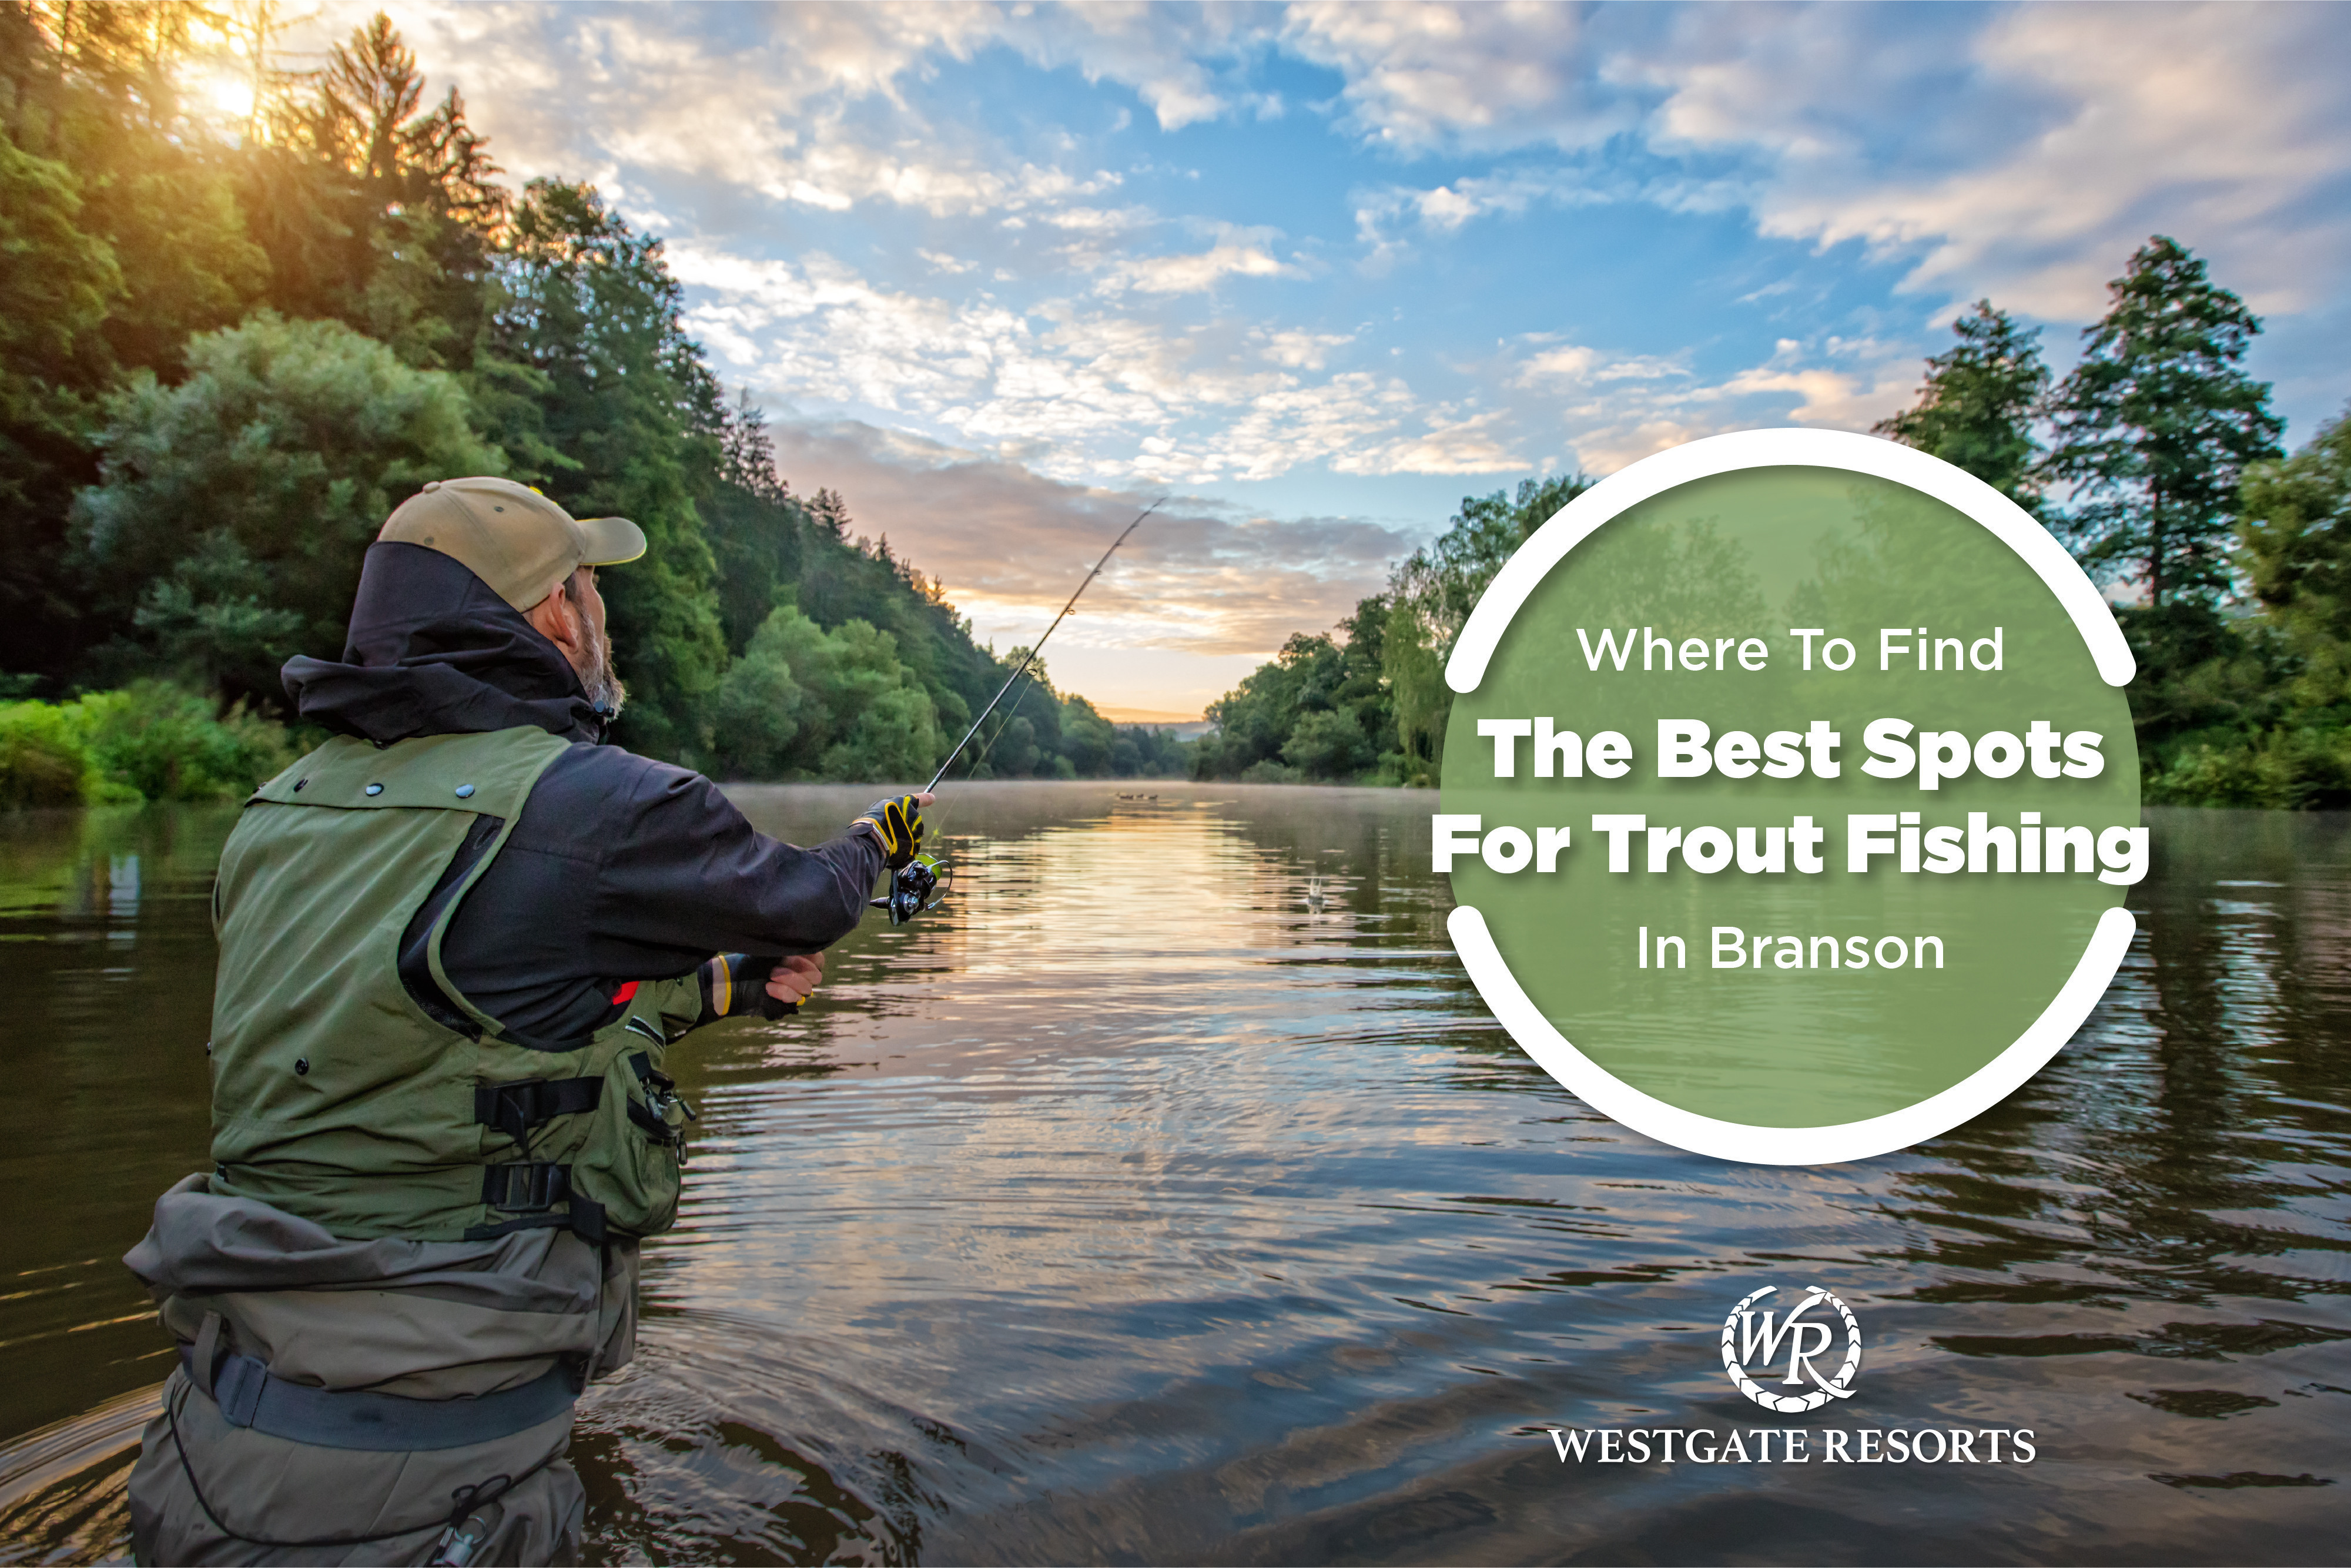 Where to Find the Best Spots For Trout Fishing in Branson: 10